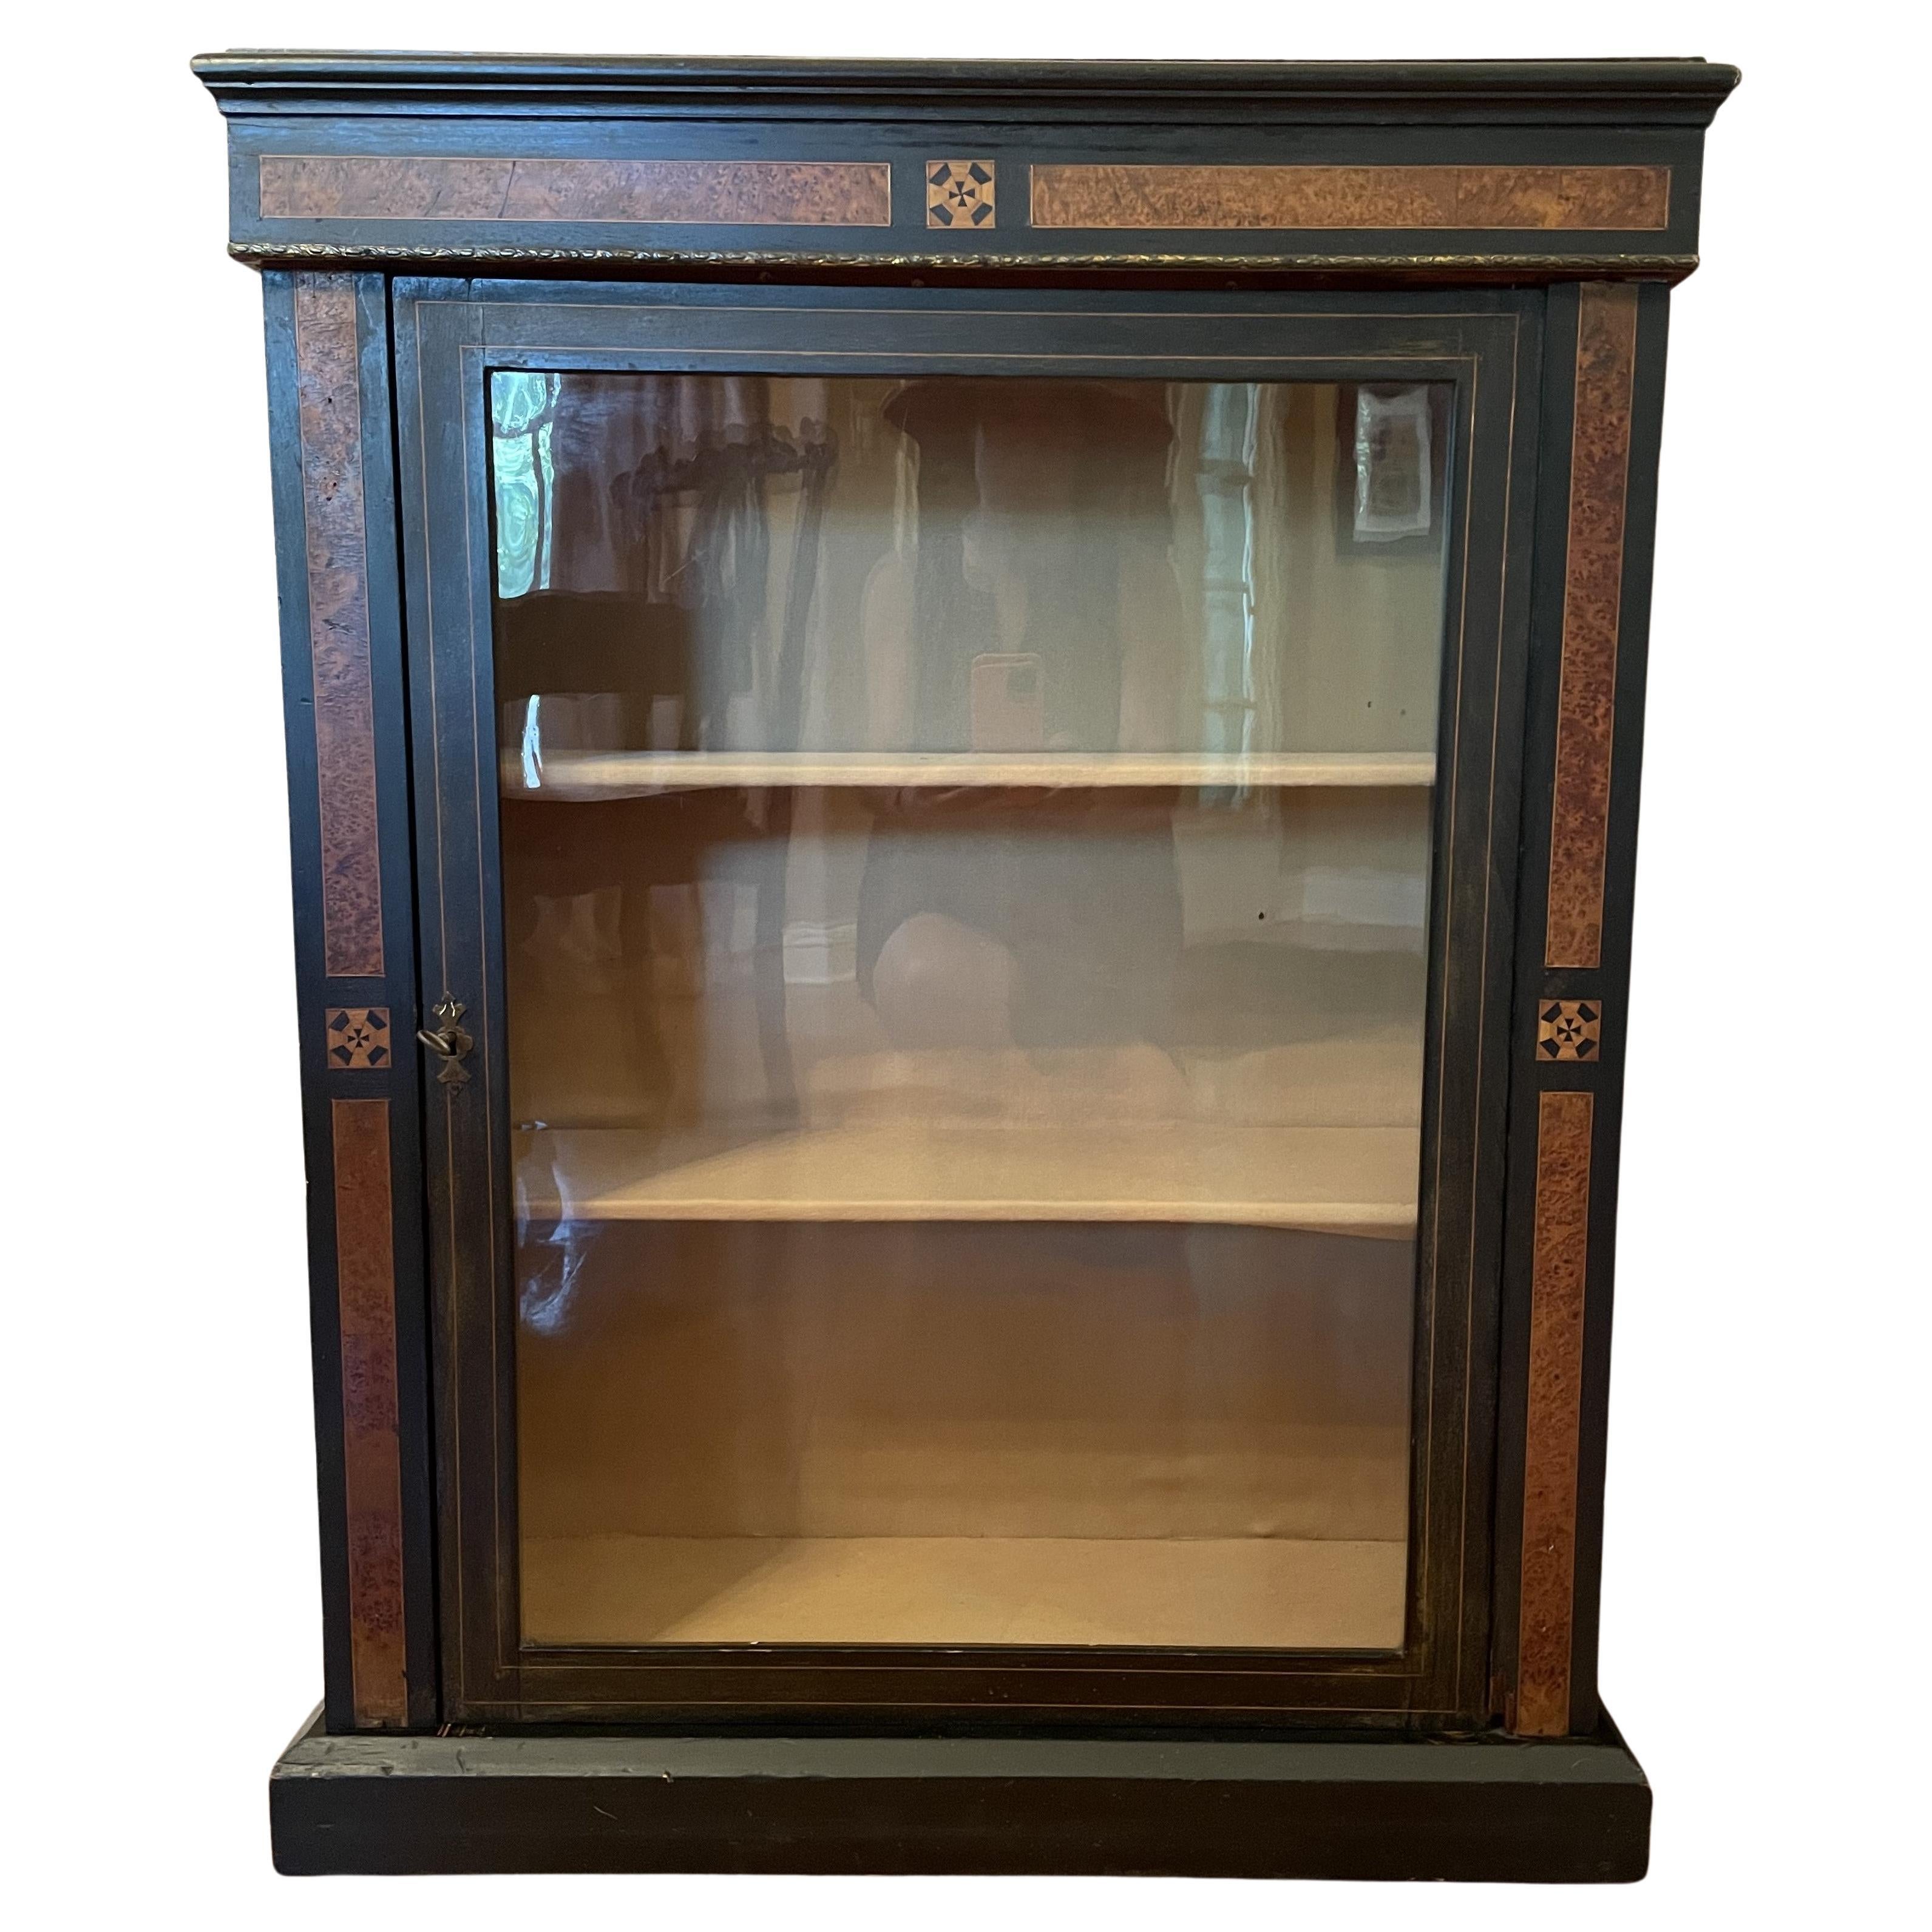 19th Century Cabinet with Glass Door and Iron Key, Rustic Biedermeier